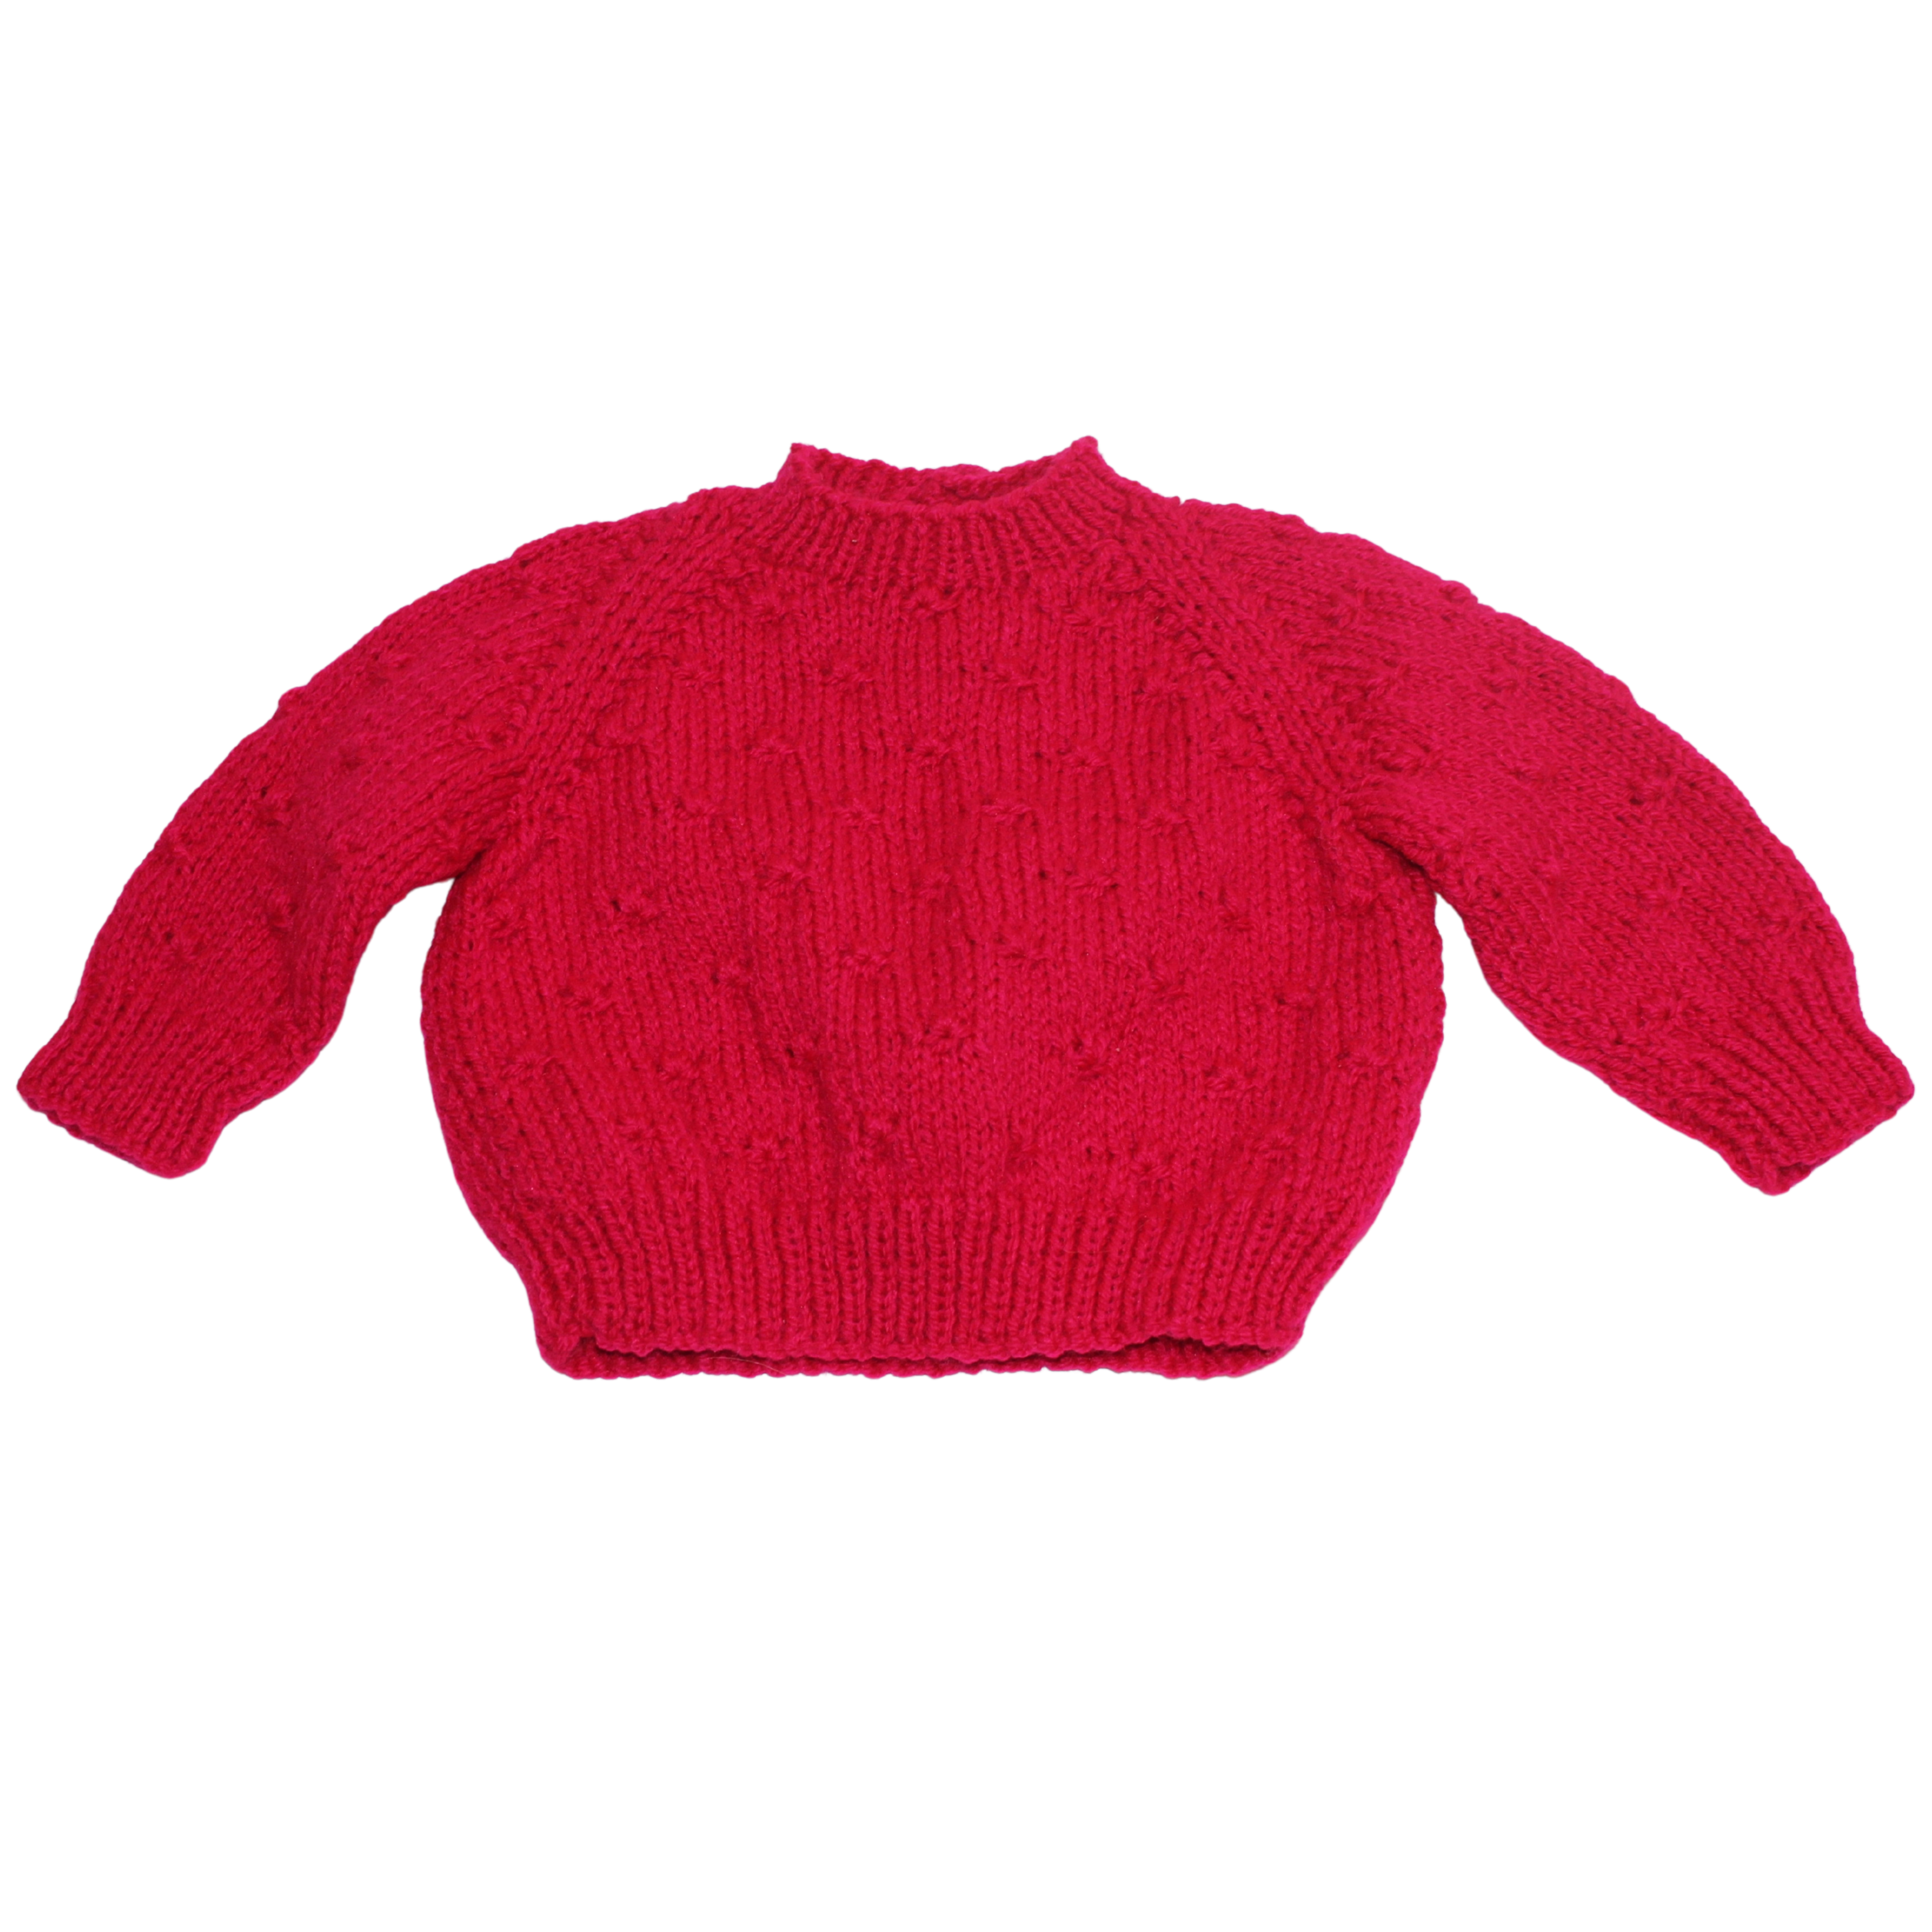 Hot Pink Knitted Jumper